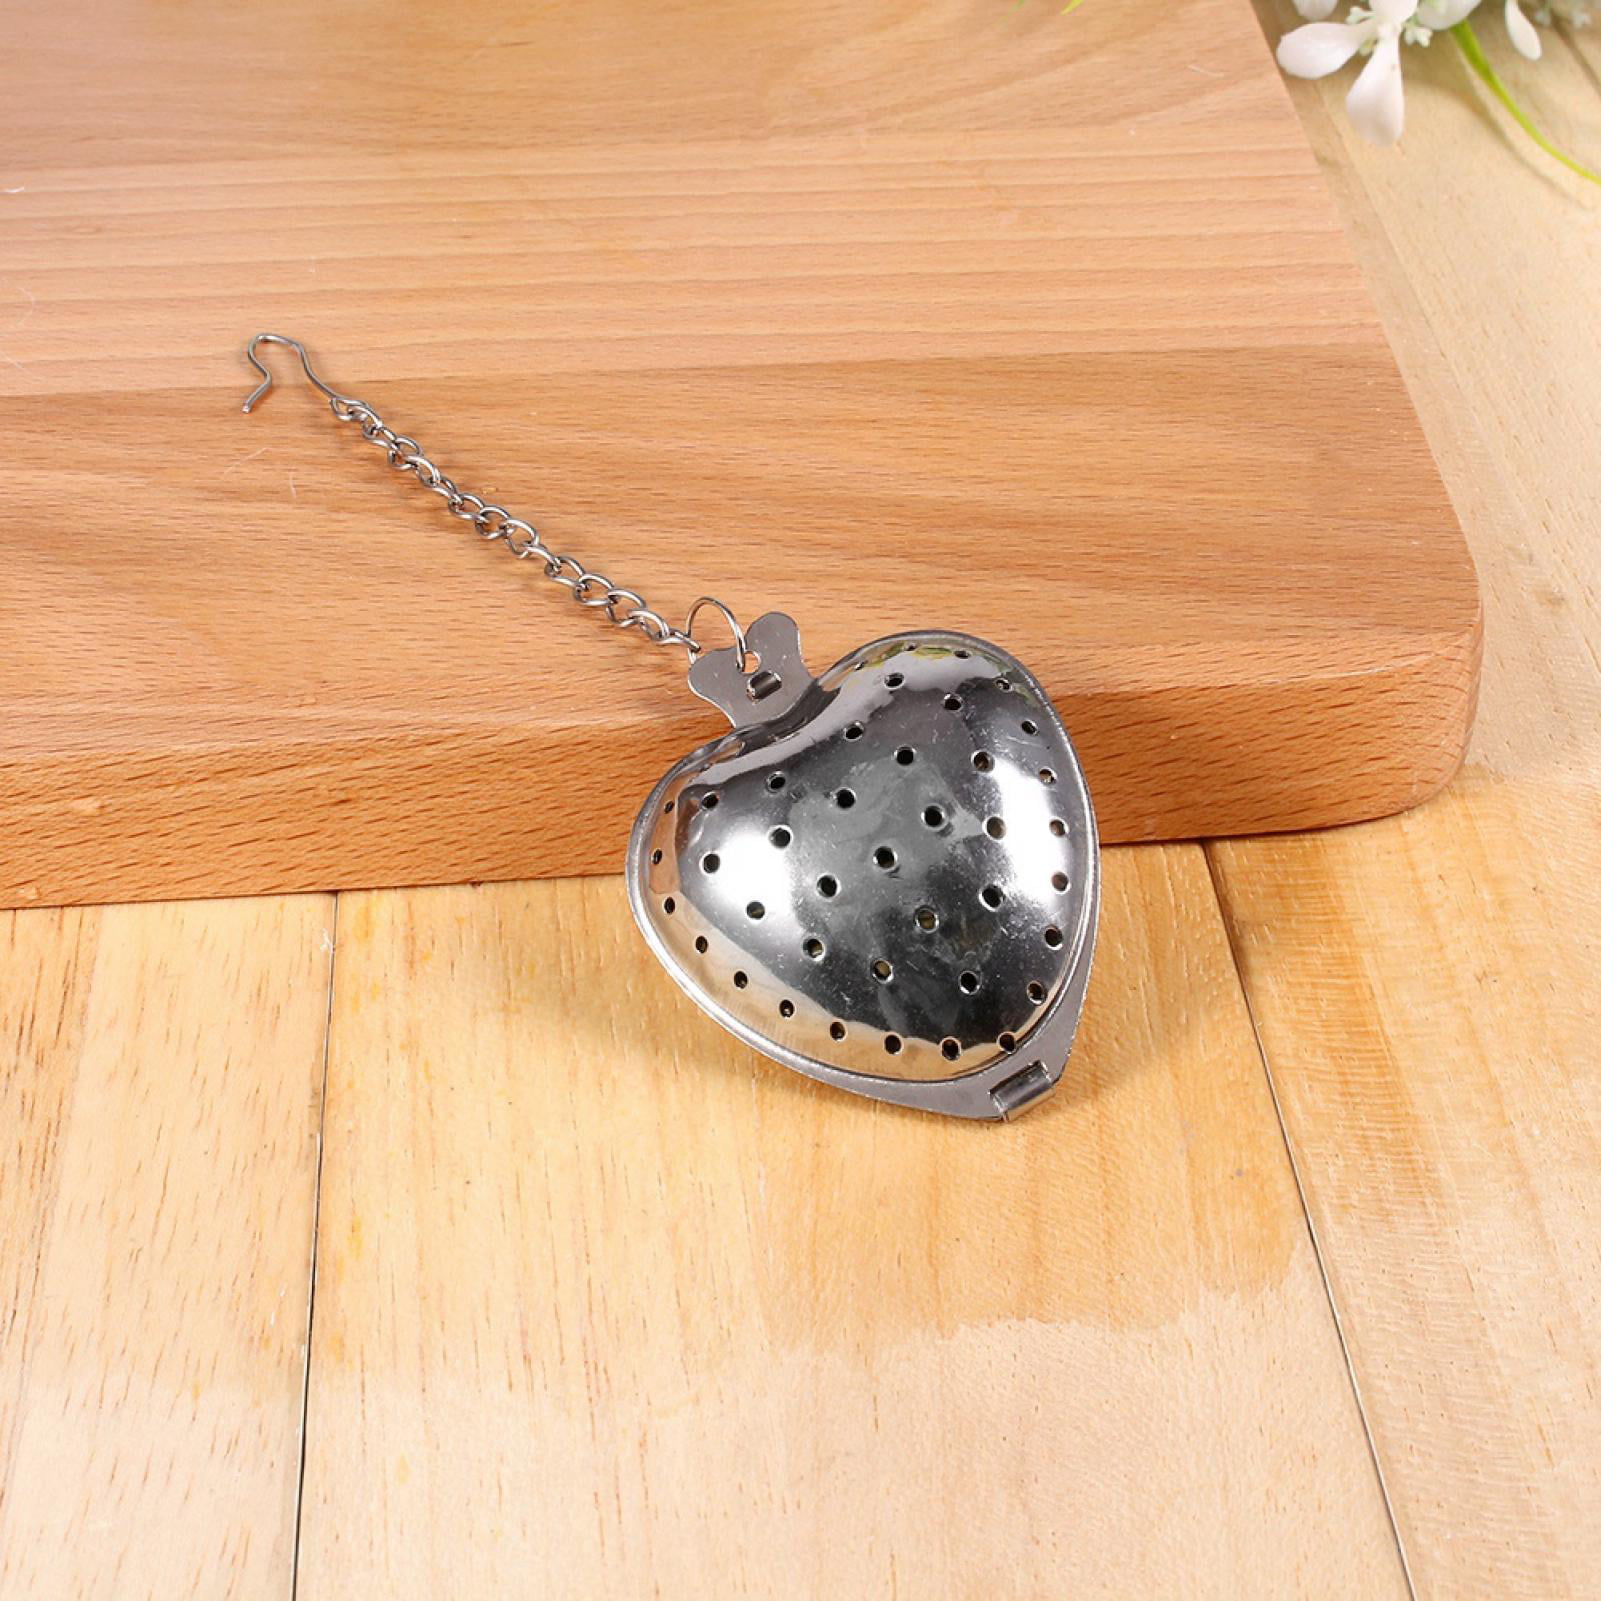 NEW Loose Heart Tea Infuser Leaf Strainer Filter Diffuser Herbal Spice Stainless